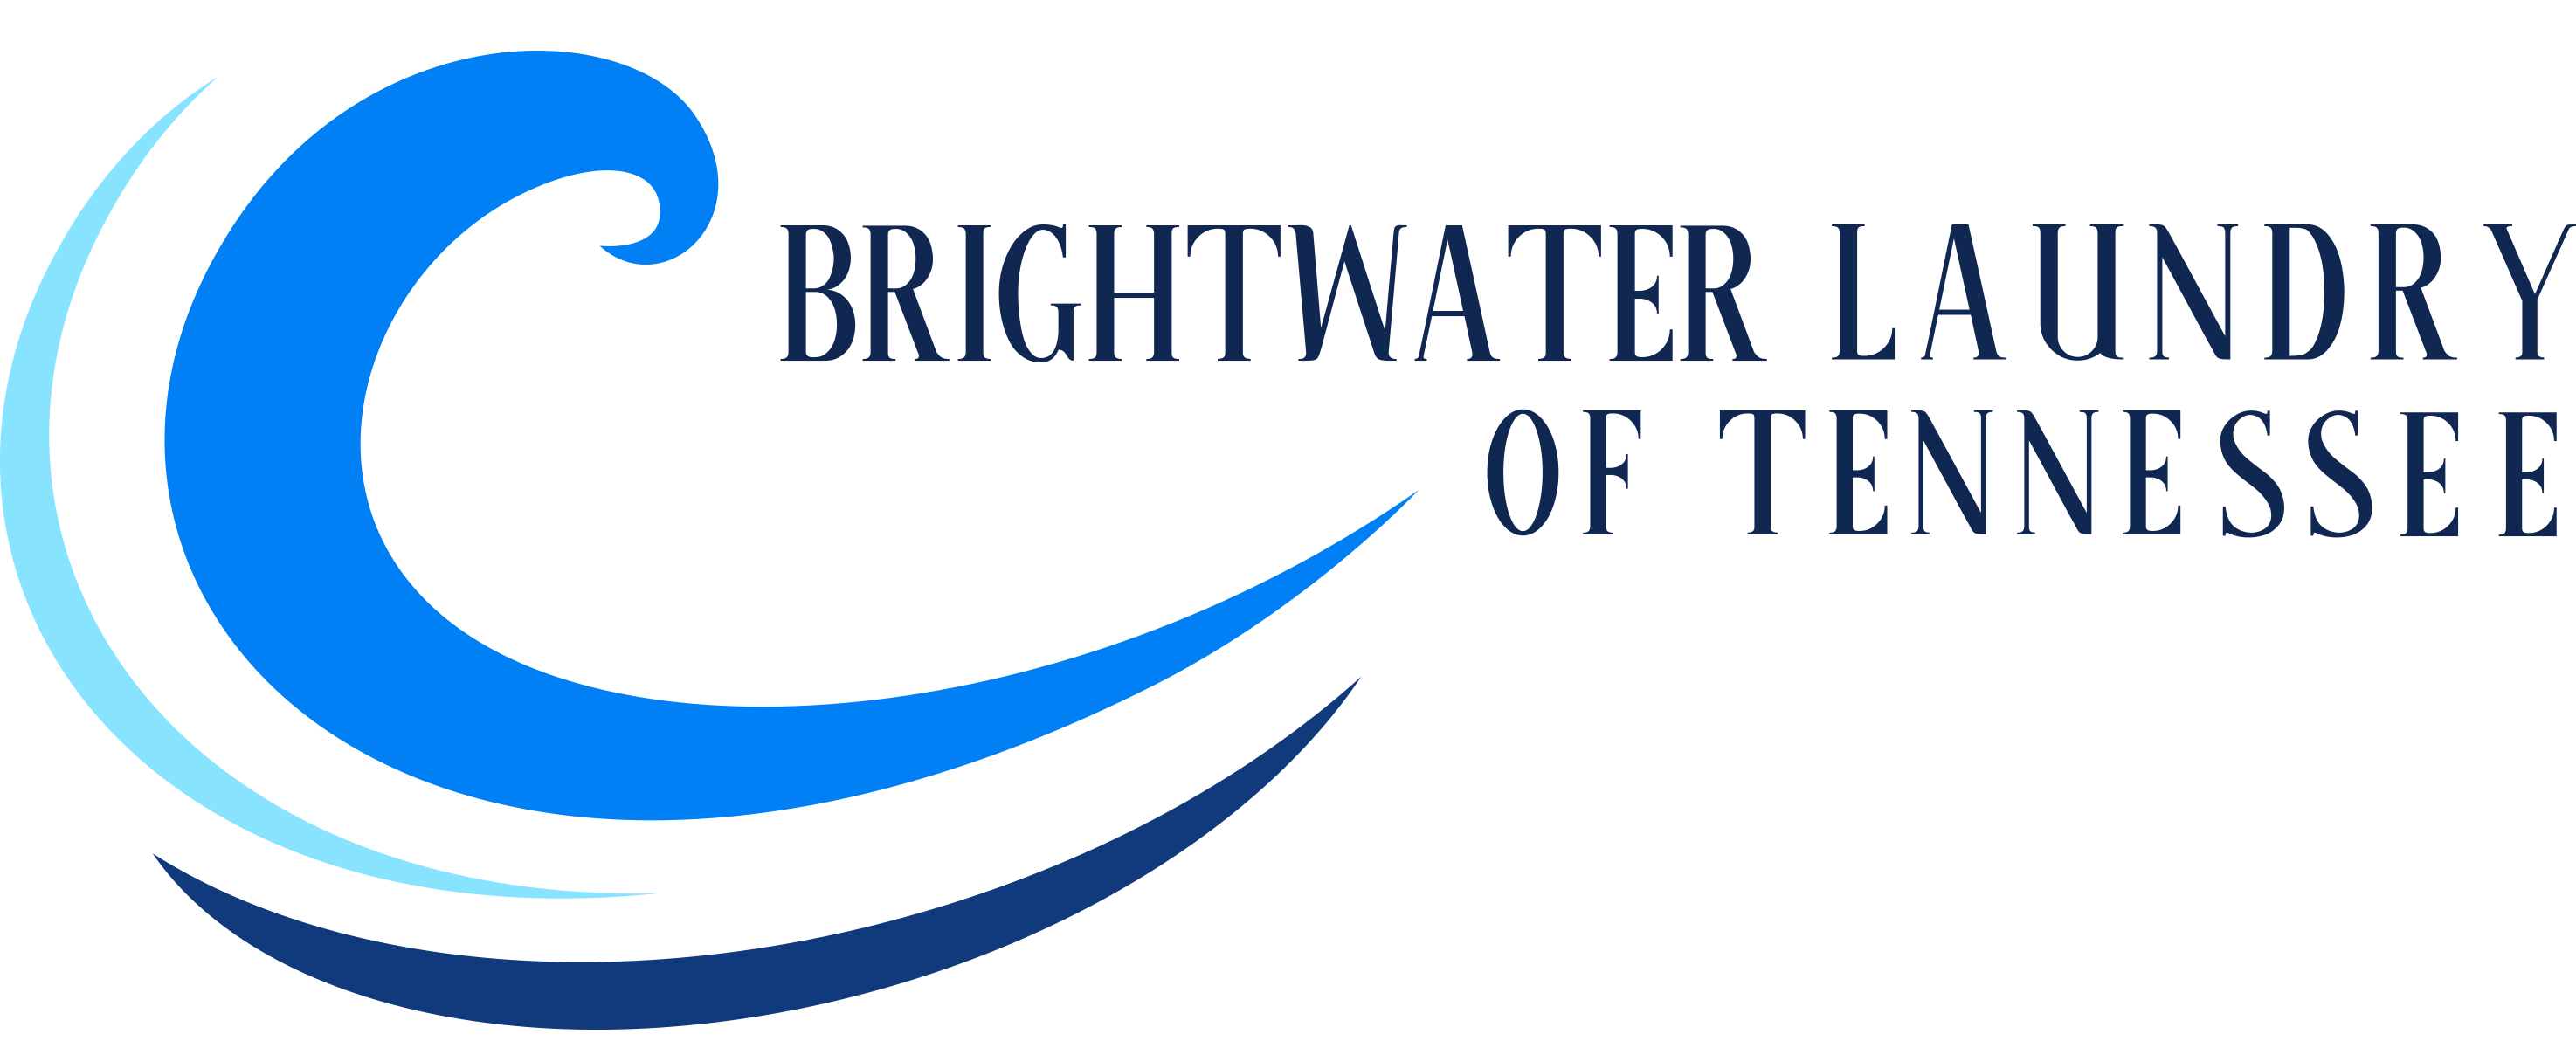 Brightwater Laundry of Tennessee